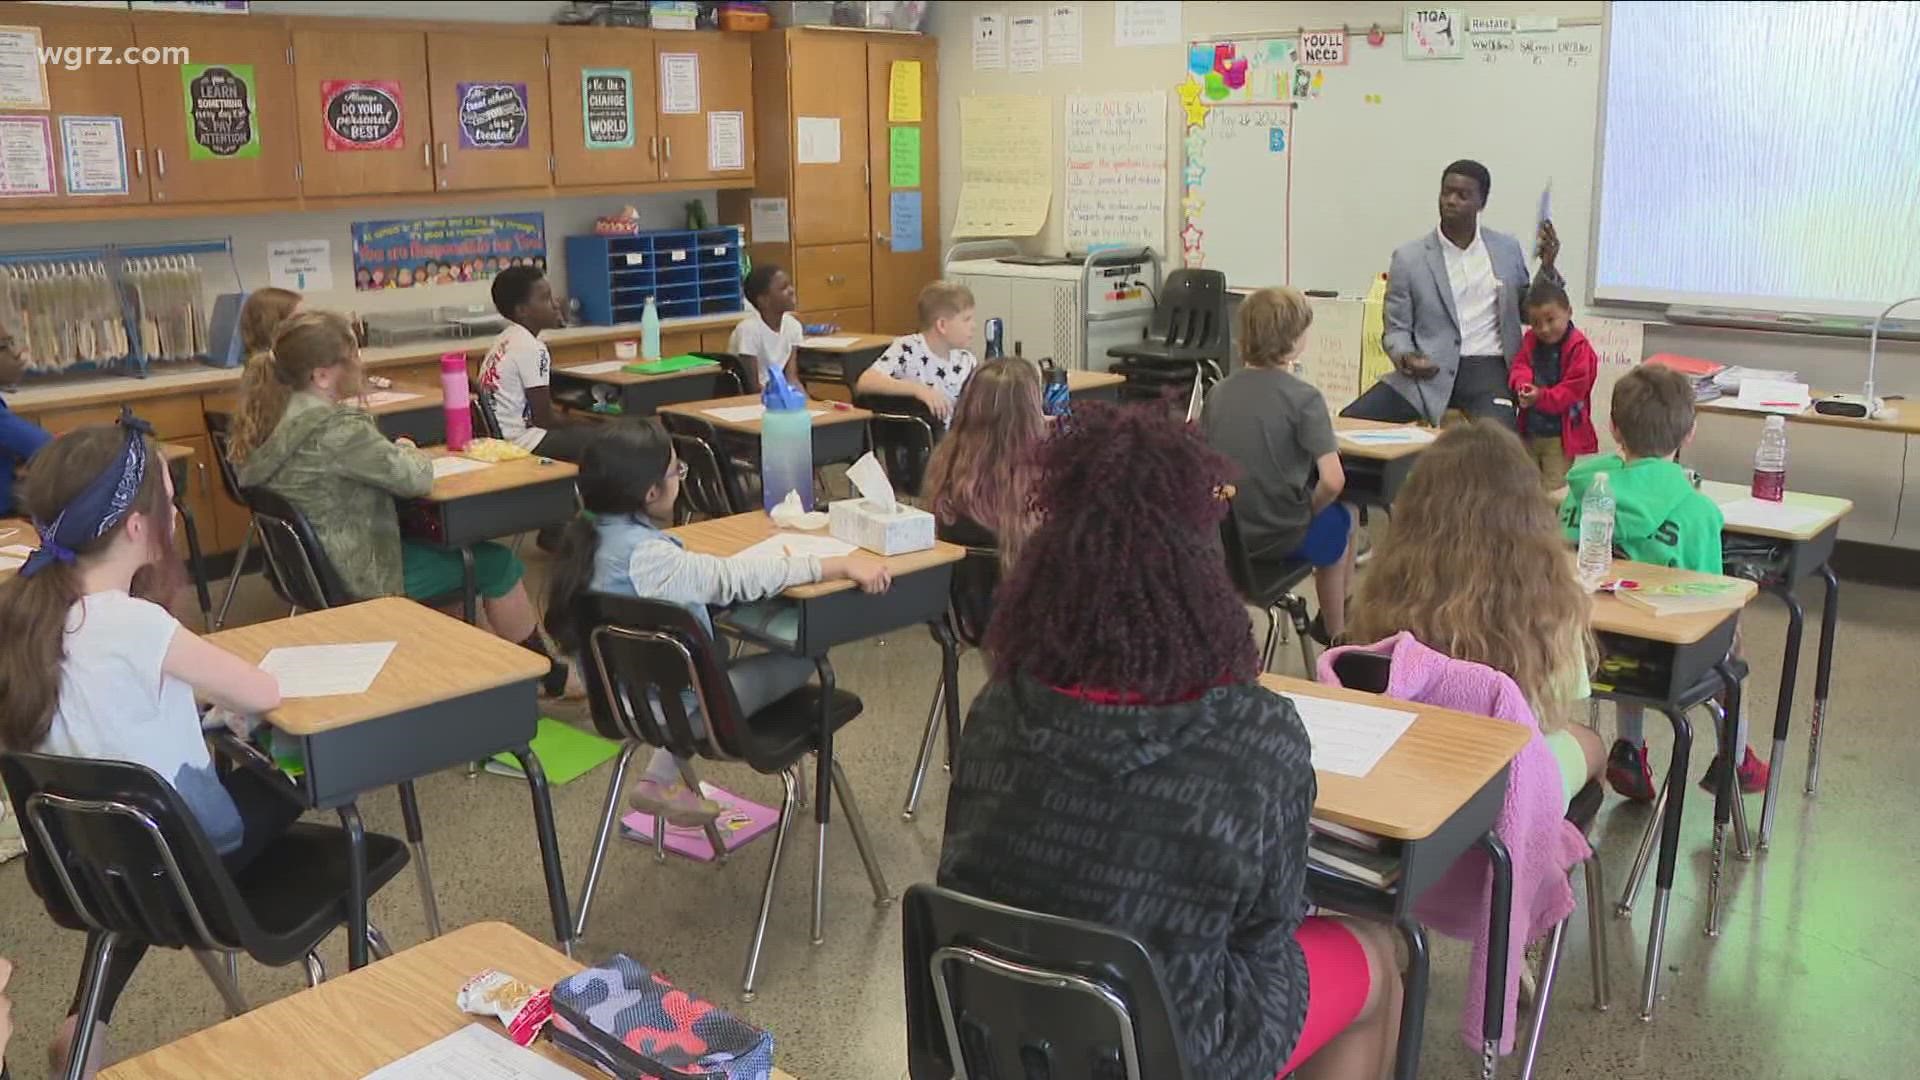 Chris Singleton came to Buffalo to speak to local students after the tragic mass shooting to spread the message of love over hate.